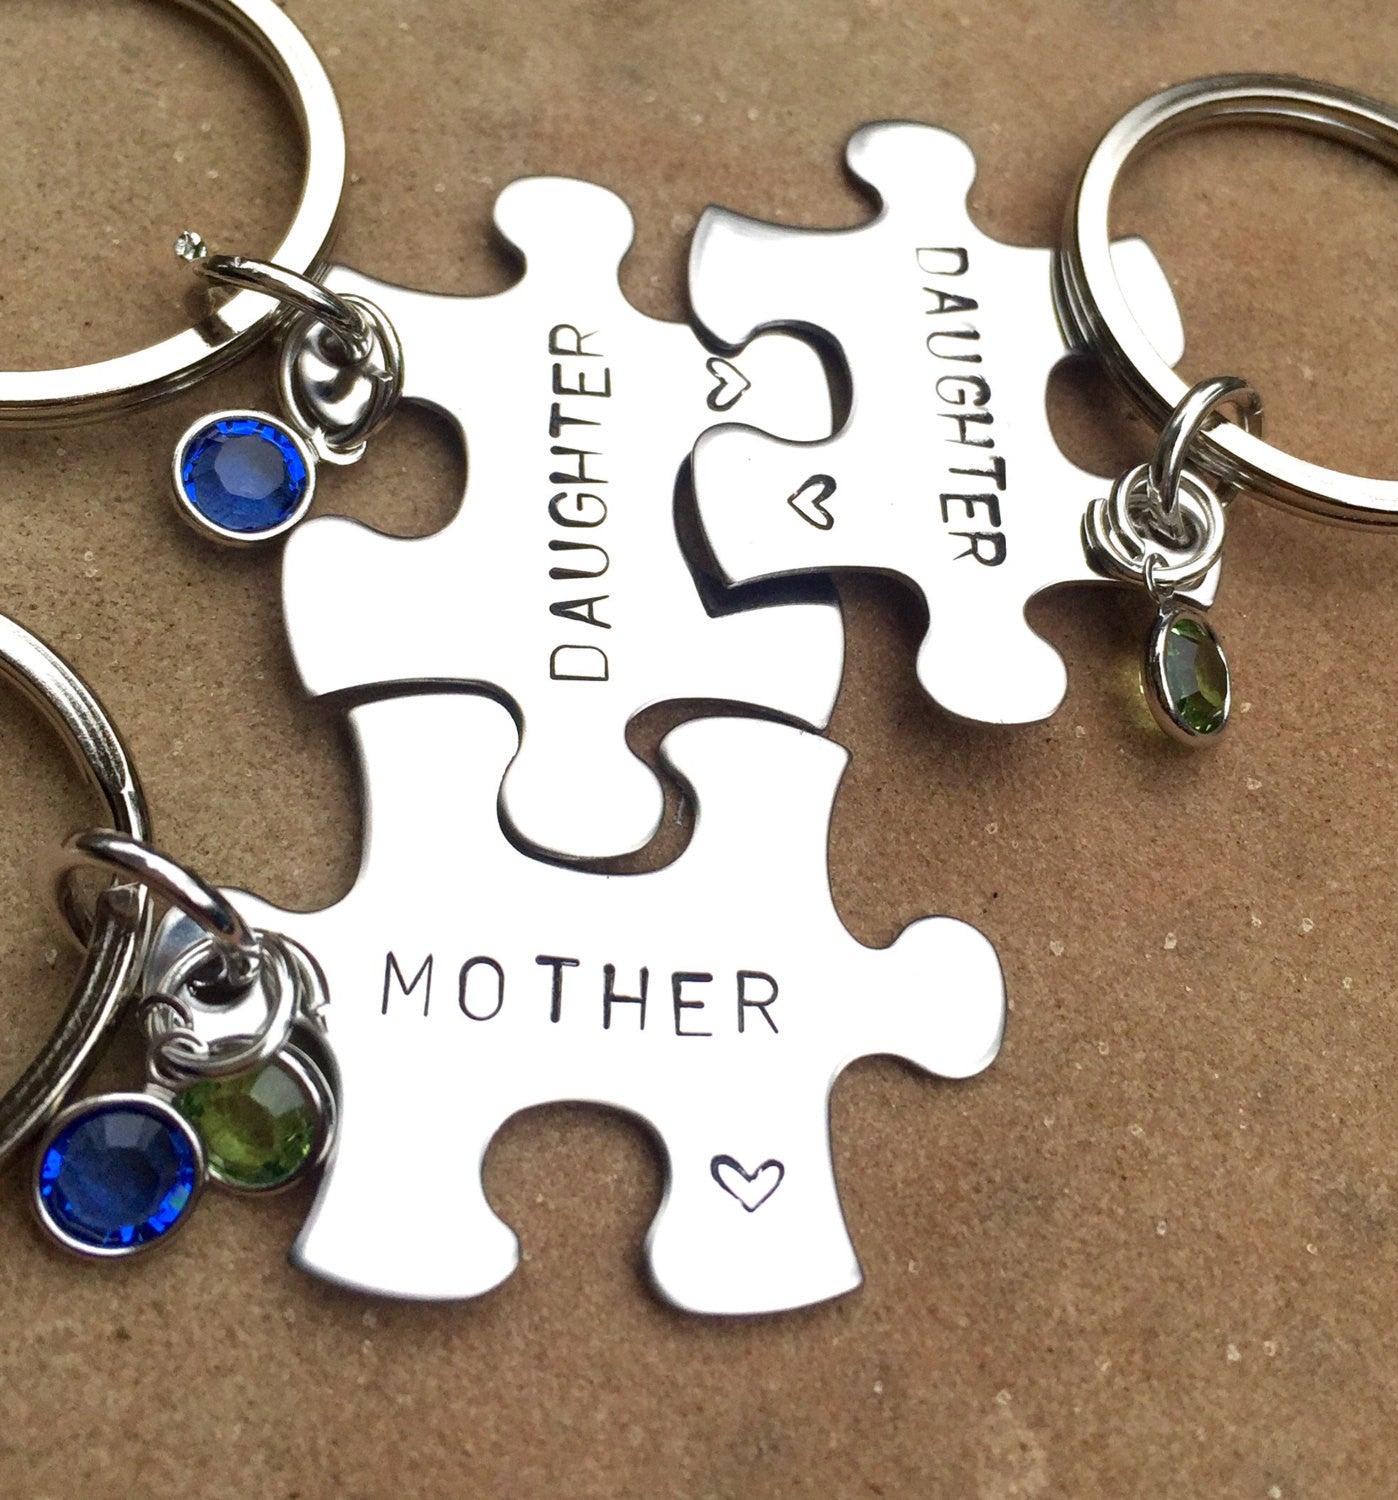 Mother Daughter Gifts, Mother Daughter Puzzle Key chains, Gifts for mom, Gifts for Daughter, natashalaoha - Natashaaloha, jewelry, bracelets, necklace, keychains, fishing lures, gifts for men, charms, personalized, 